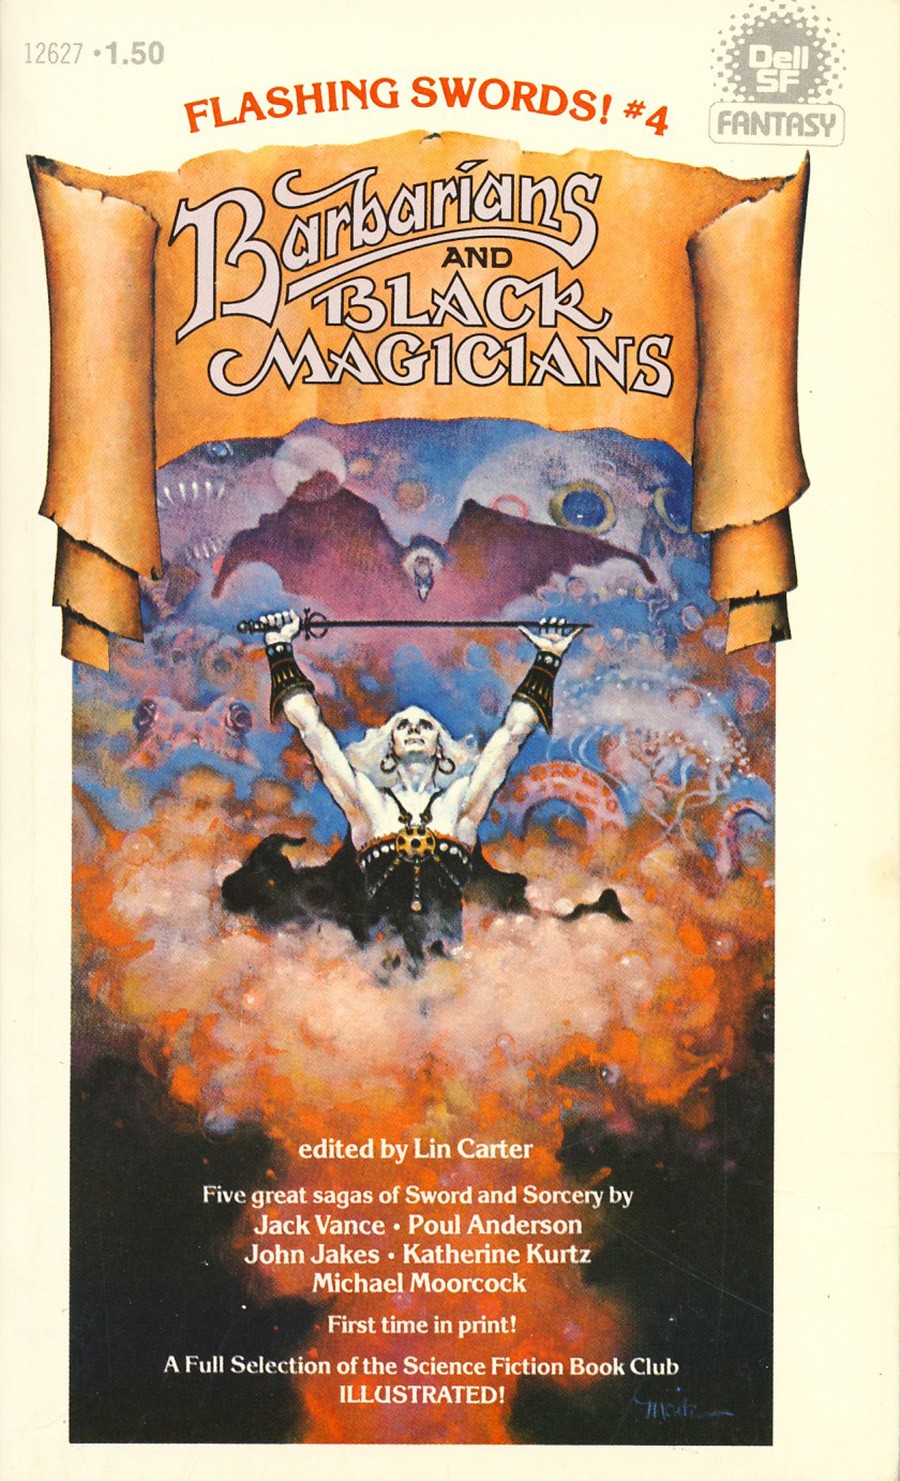 Cover of “Flashing Swords! #4: Barbarians and Black Magicians”